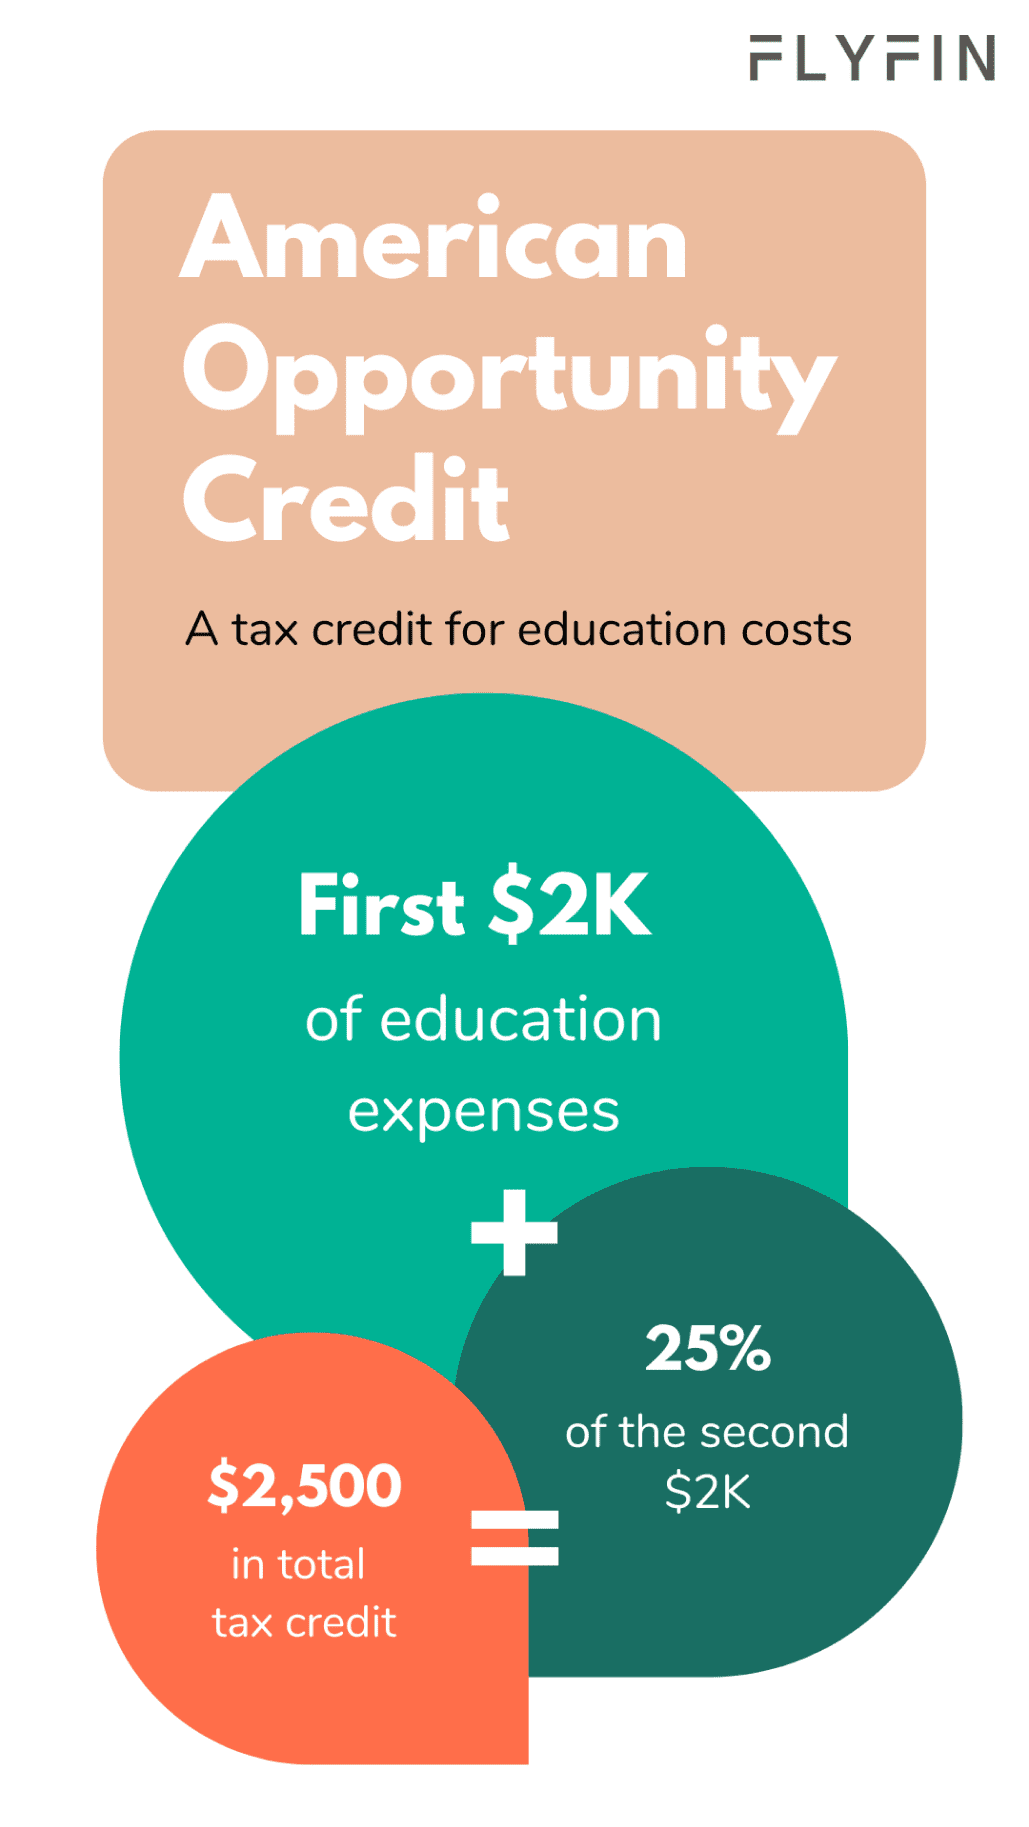 Image explaining American Opportunity Credit - a tax credit for education costs up to $2,500. Available for eligible taxpayers, not limited to self-employed or freelancers. No mention of 1099 or taxes.